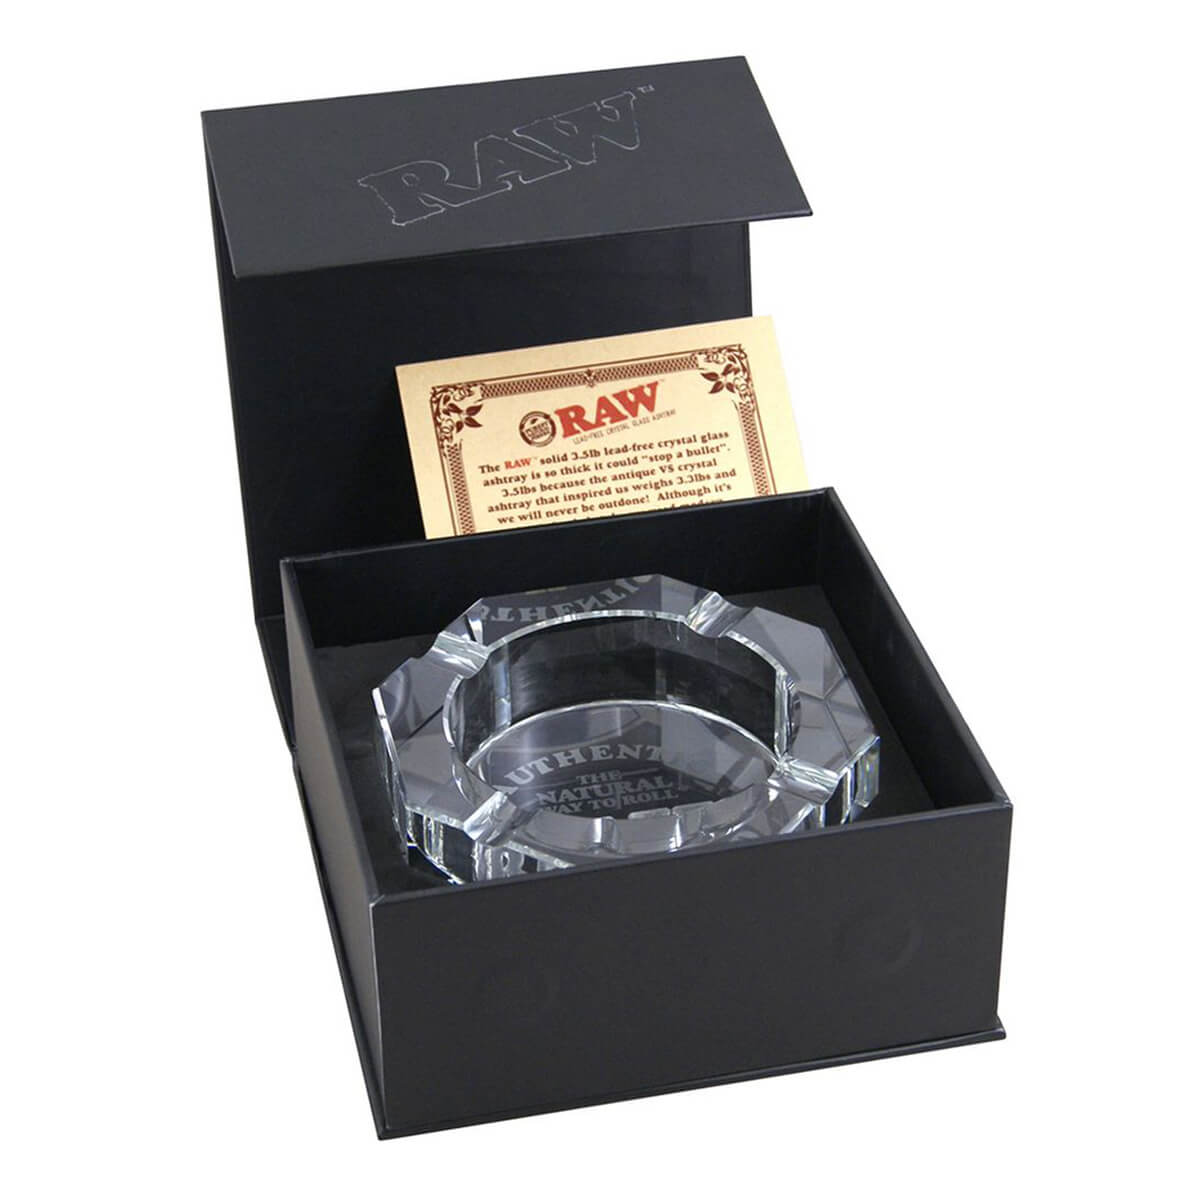 Raw Limited Edition Thick Glass Ashtray (Lead Free)